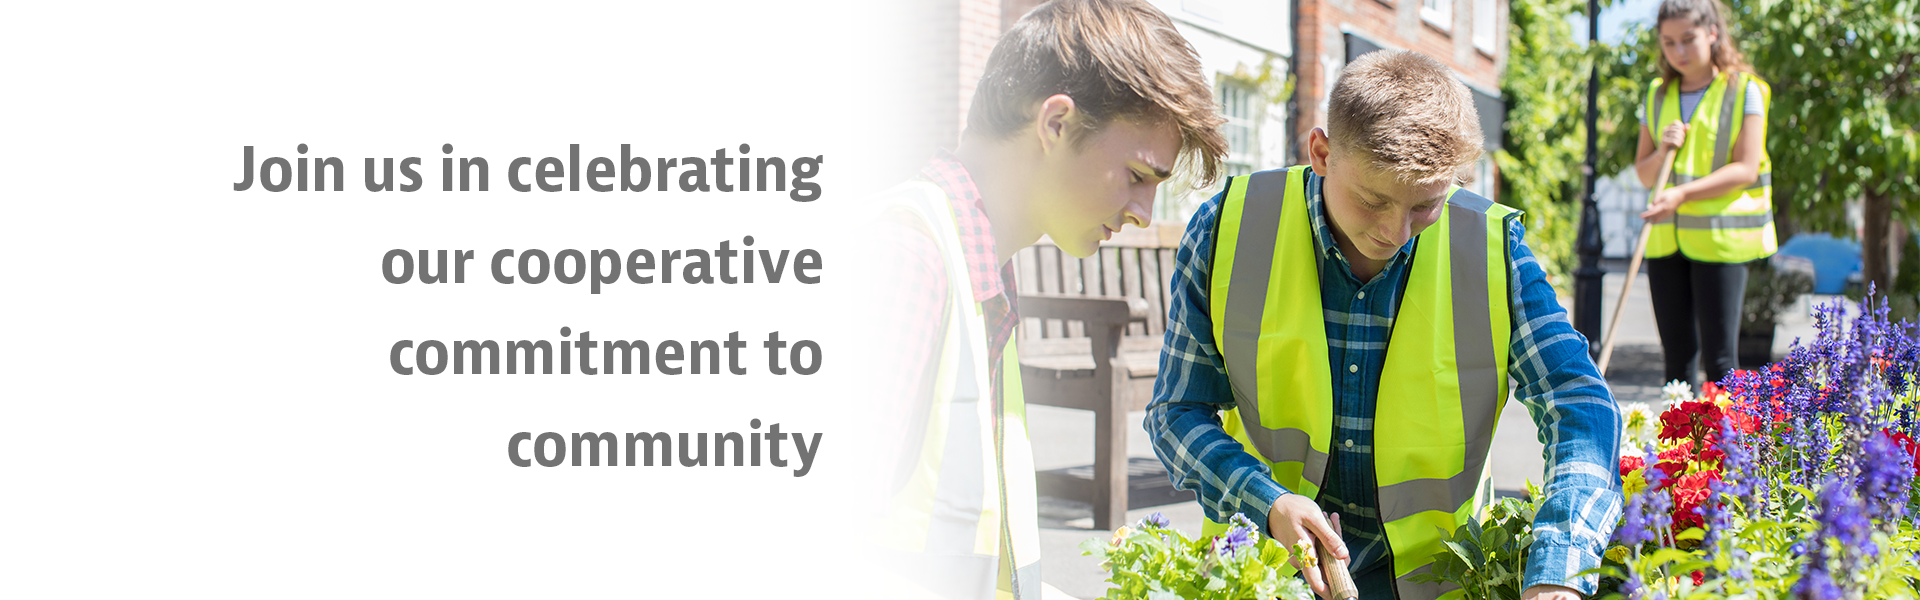 Join us in celebrating our cooperative commitment to community